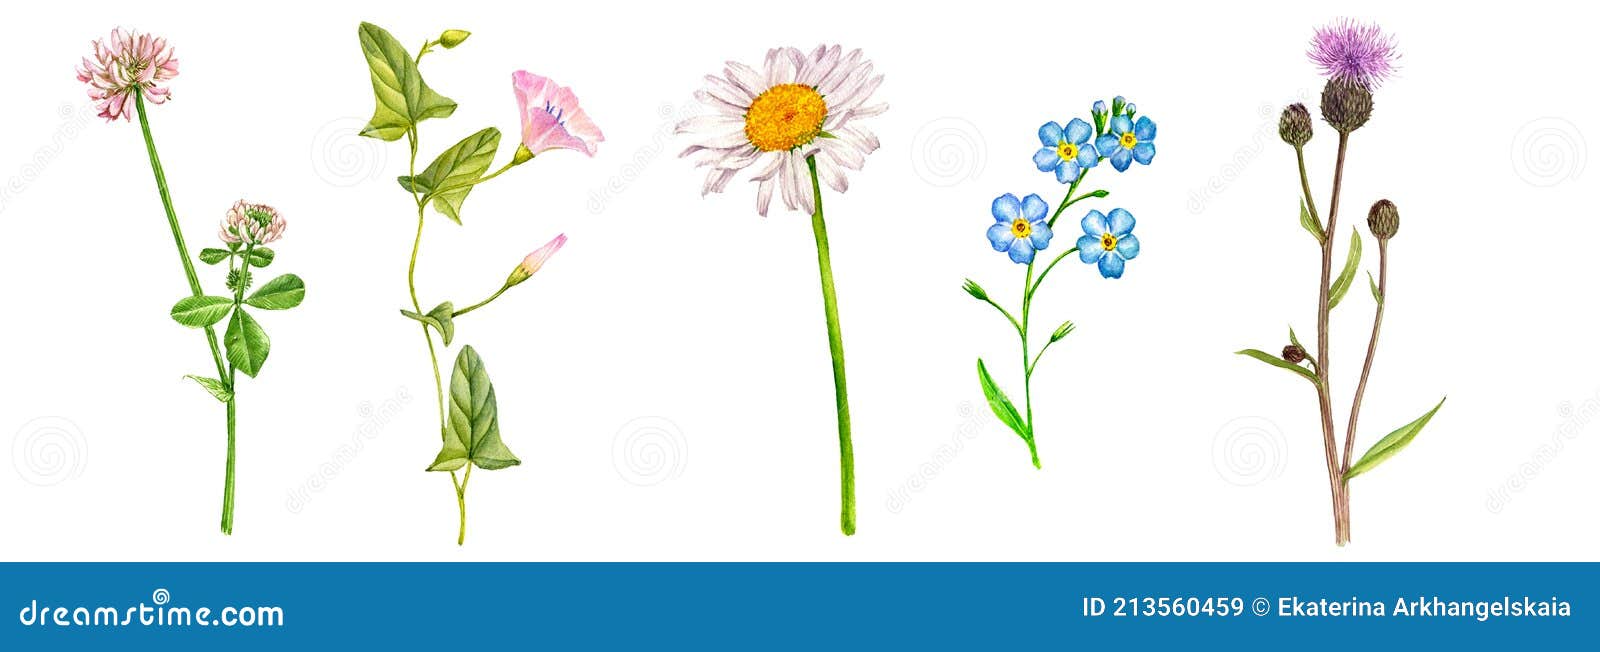 Watercolor Drawing Set of Wild Flowers Stock Illustration ...